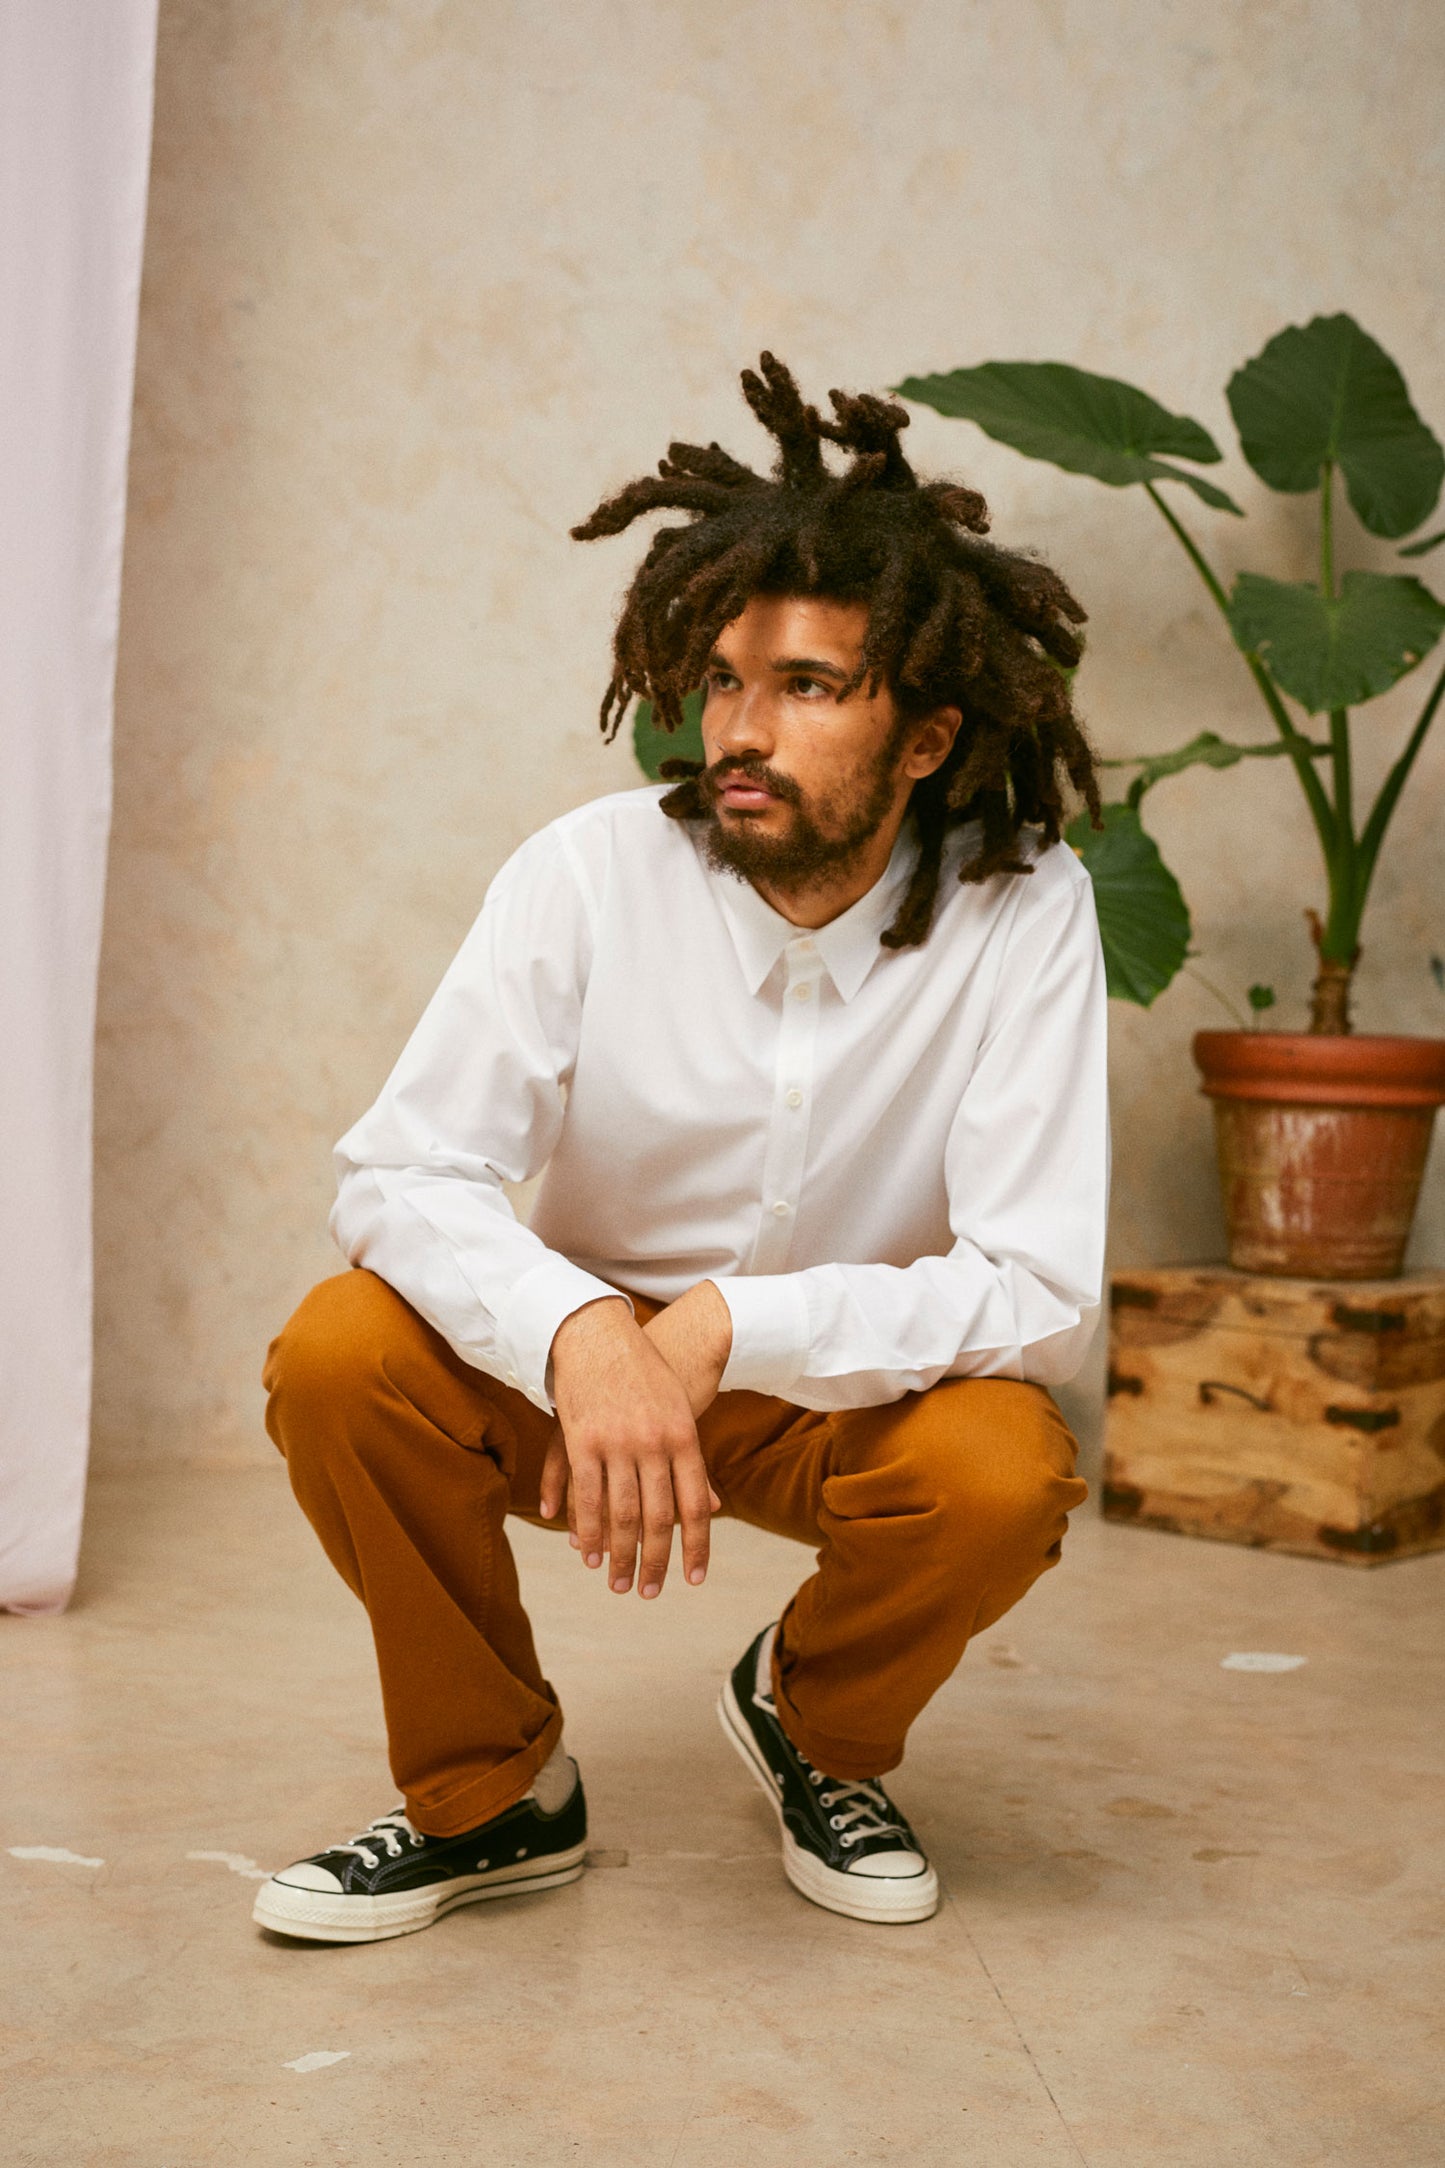 Model is crouching on the floor, with his arms resting on his knee and hands close together. He is wearing Saywood's Eddy Mens mens white Shirt. Worn with tabacco trousers and black Converse. A plant and drop of pink fabric can be seen in the background.